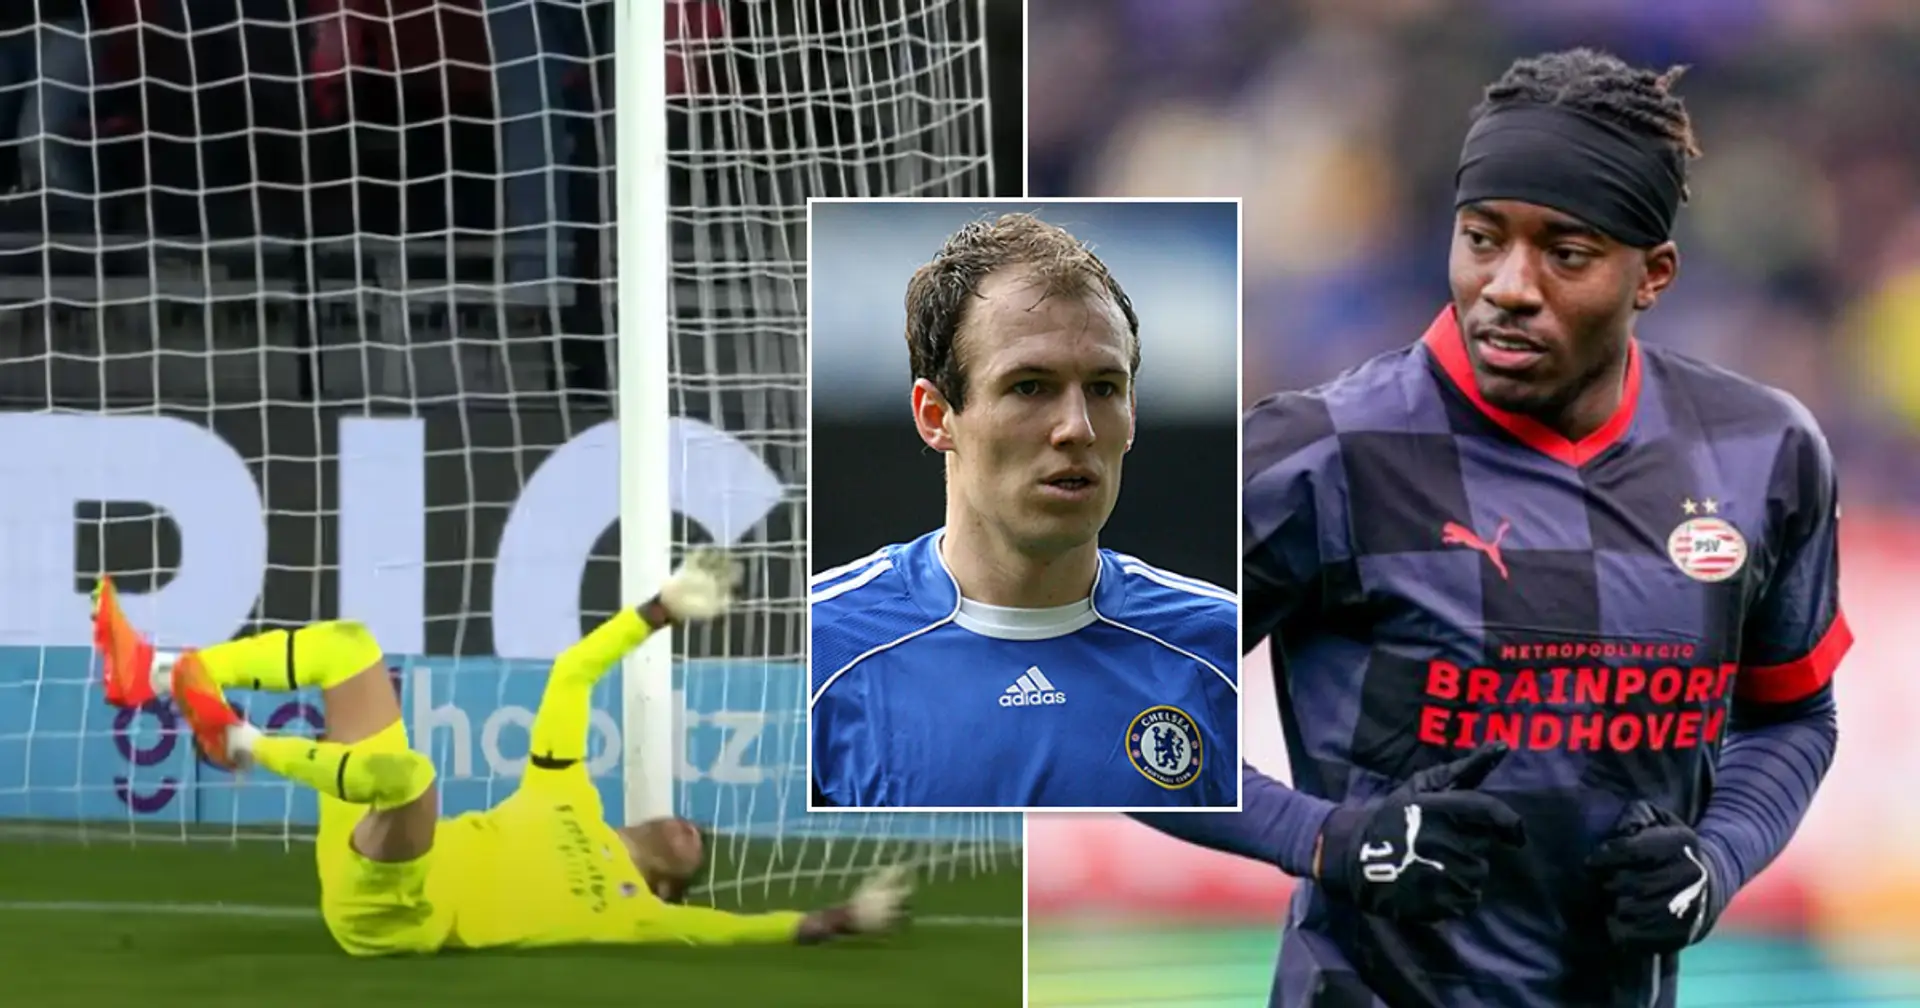 Chelsea may have found new Arjen Robben in Madueke - most recent footage shows how so